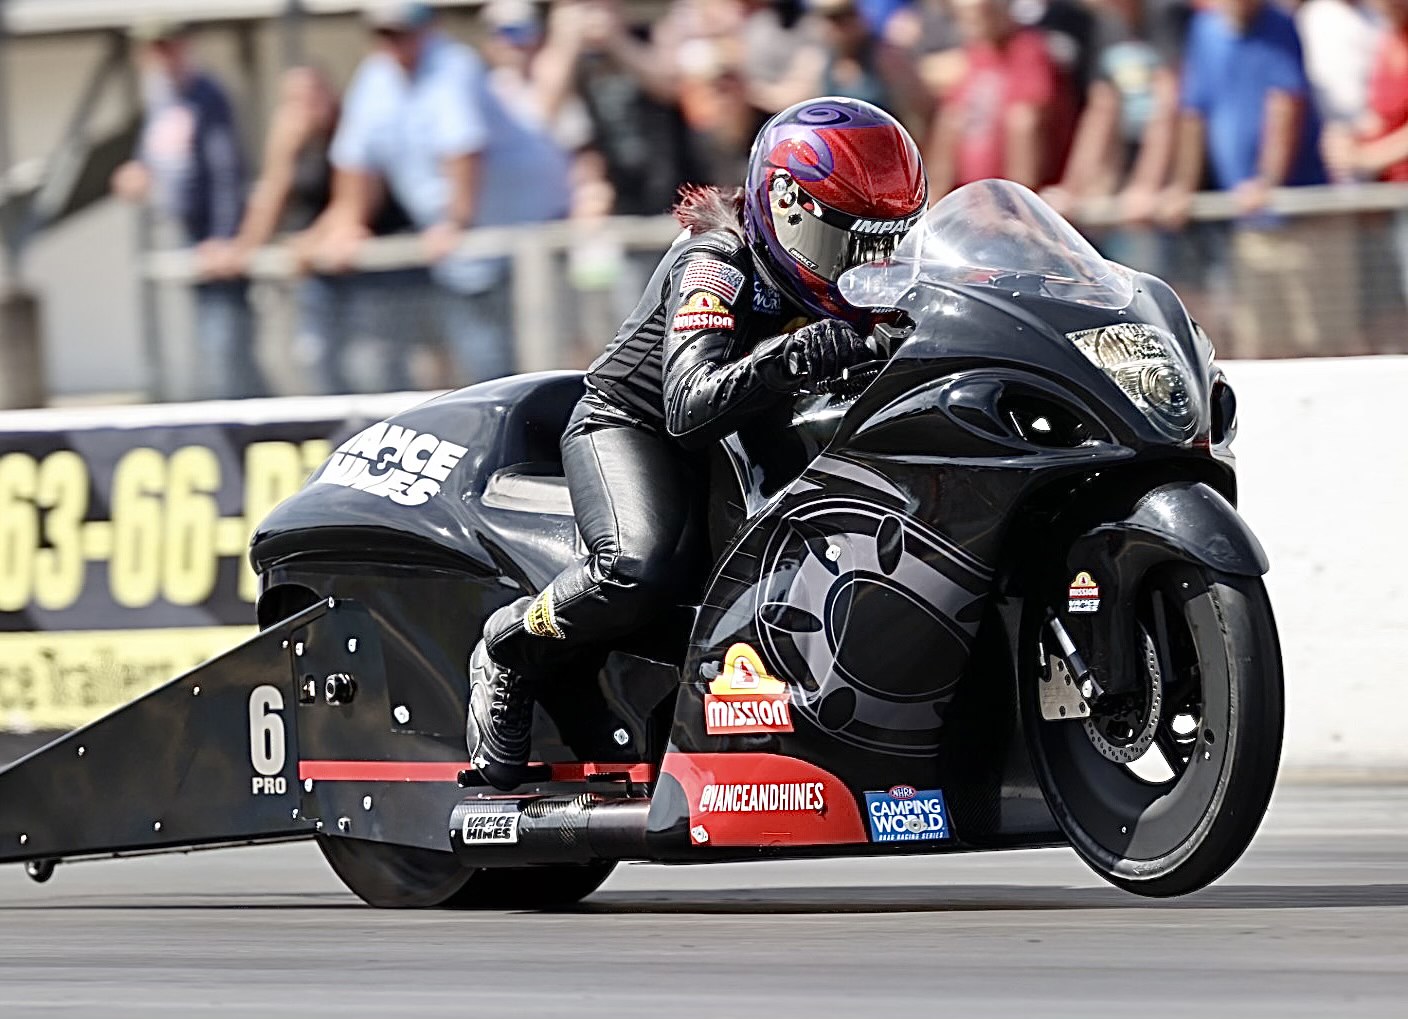 Race Day Update Angelle Sampey Goes 200MPH, New Vance & Hines 4Valve